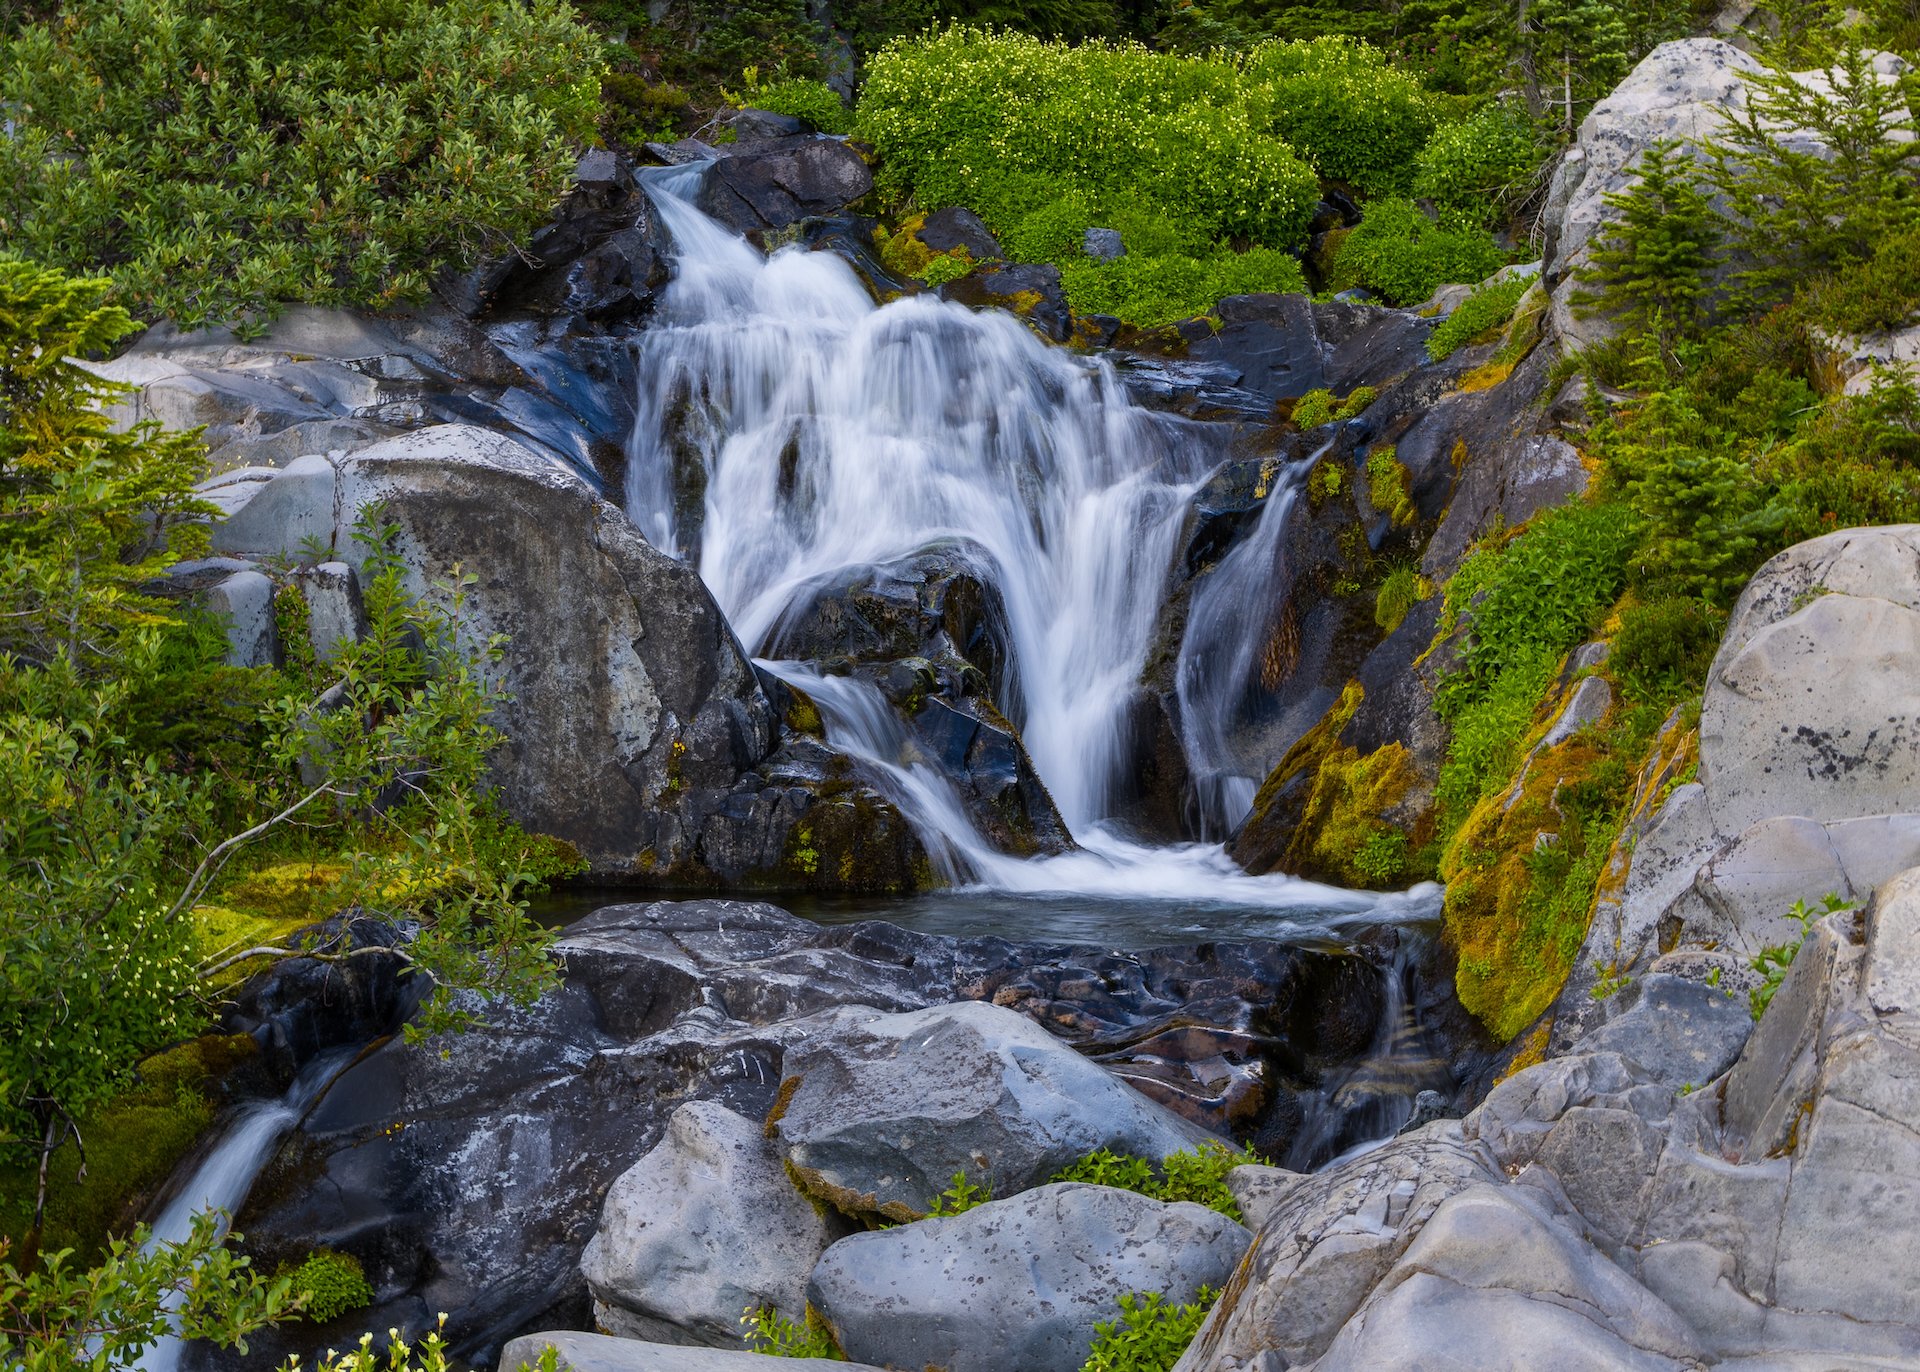  There are many little streams flowing down from the mountain, creating small waterfalls as we continued along the trail.  